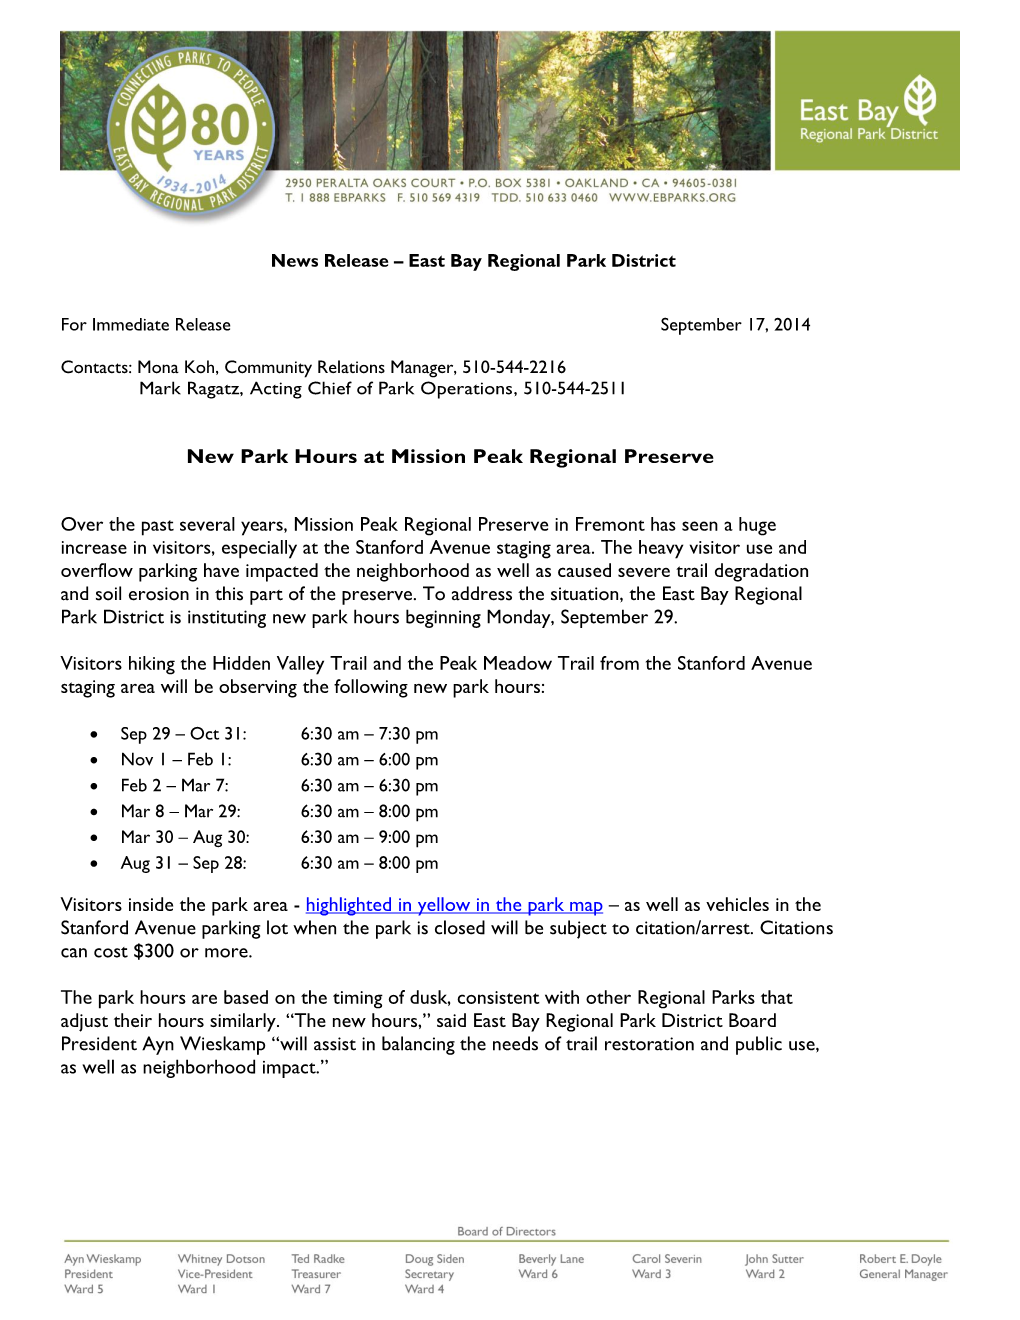 New Park Hours at Mission Peak Regional Preserve Over the Past